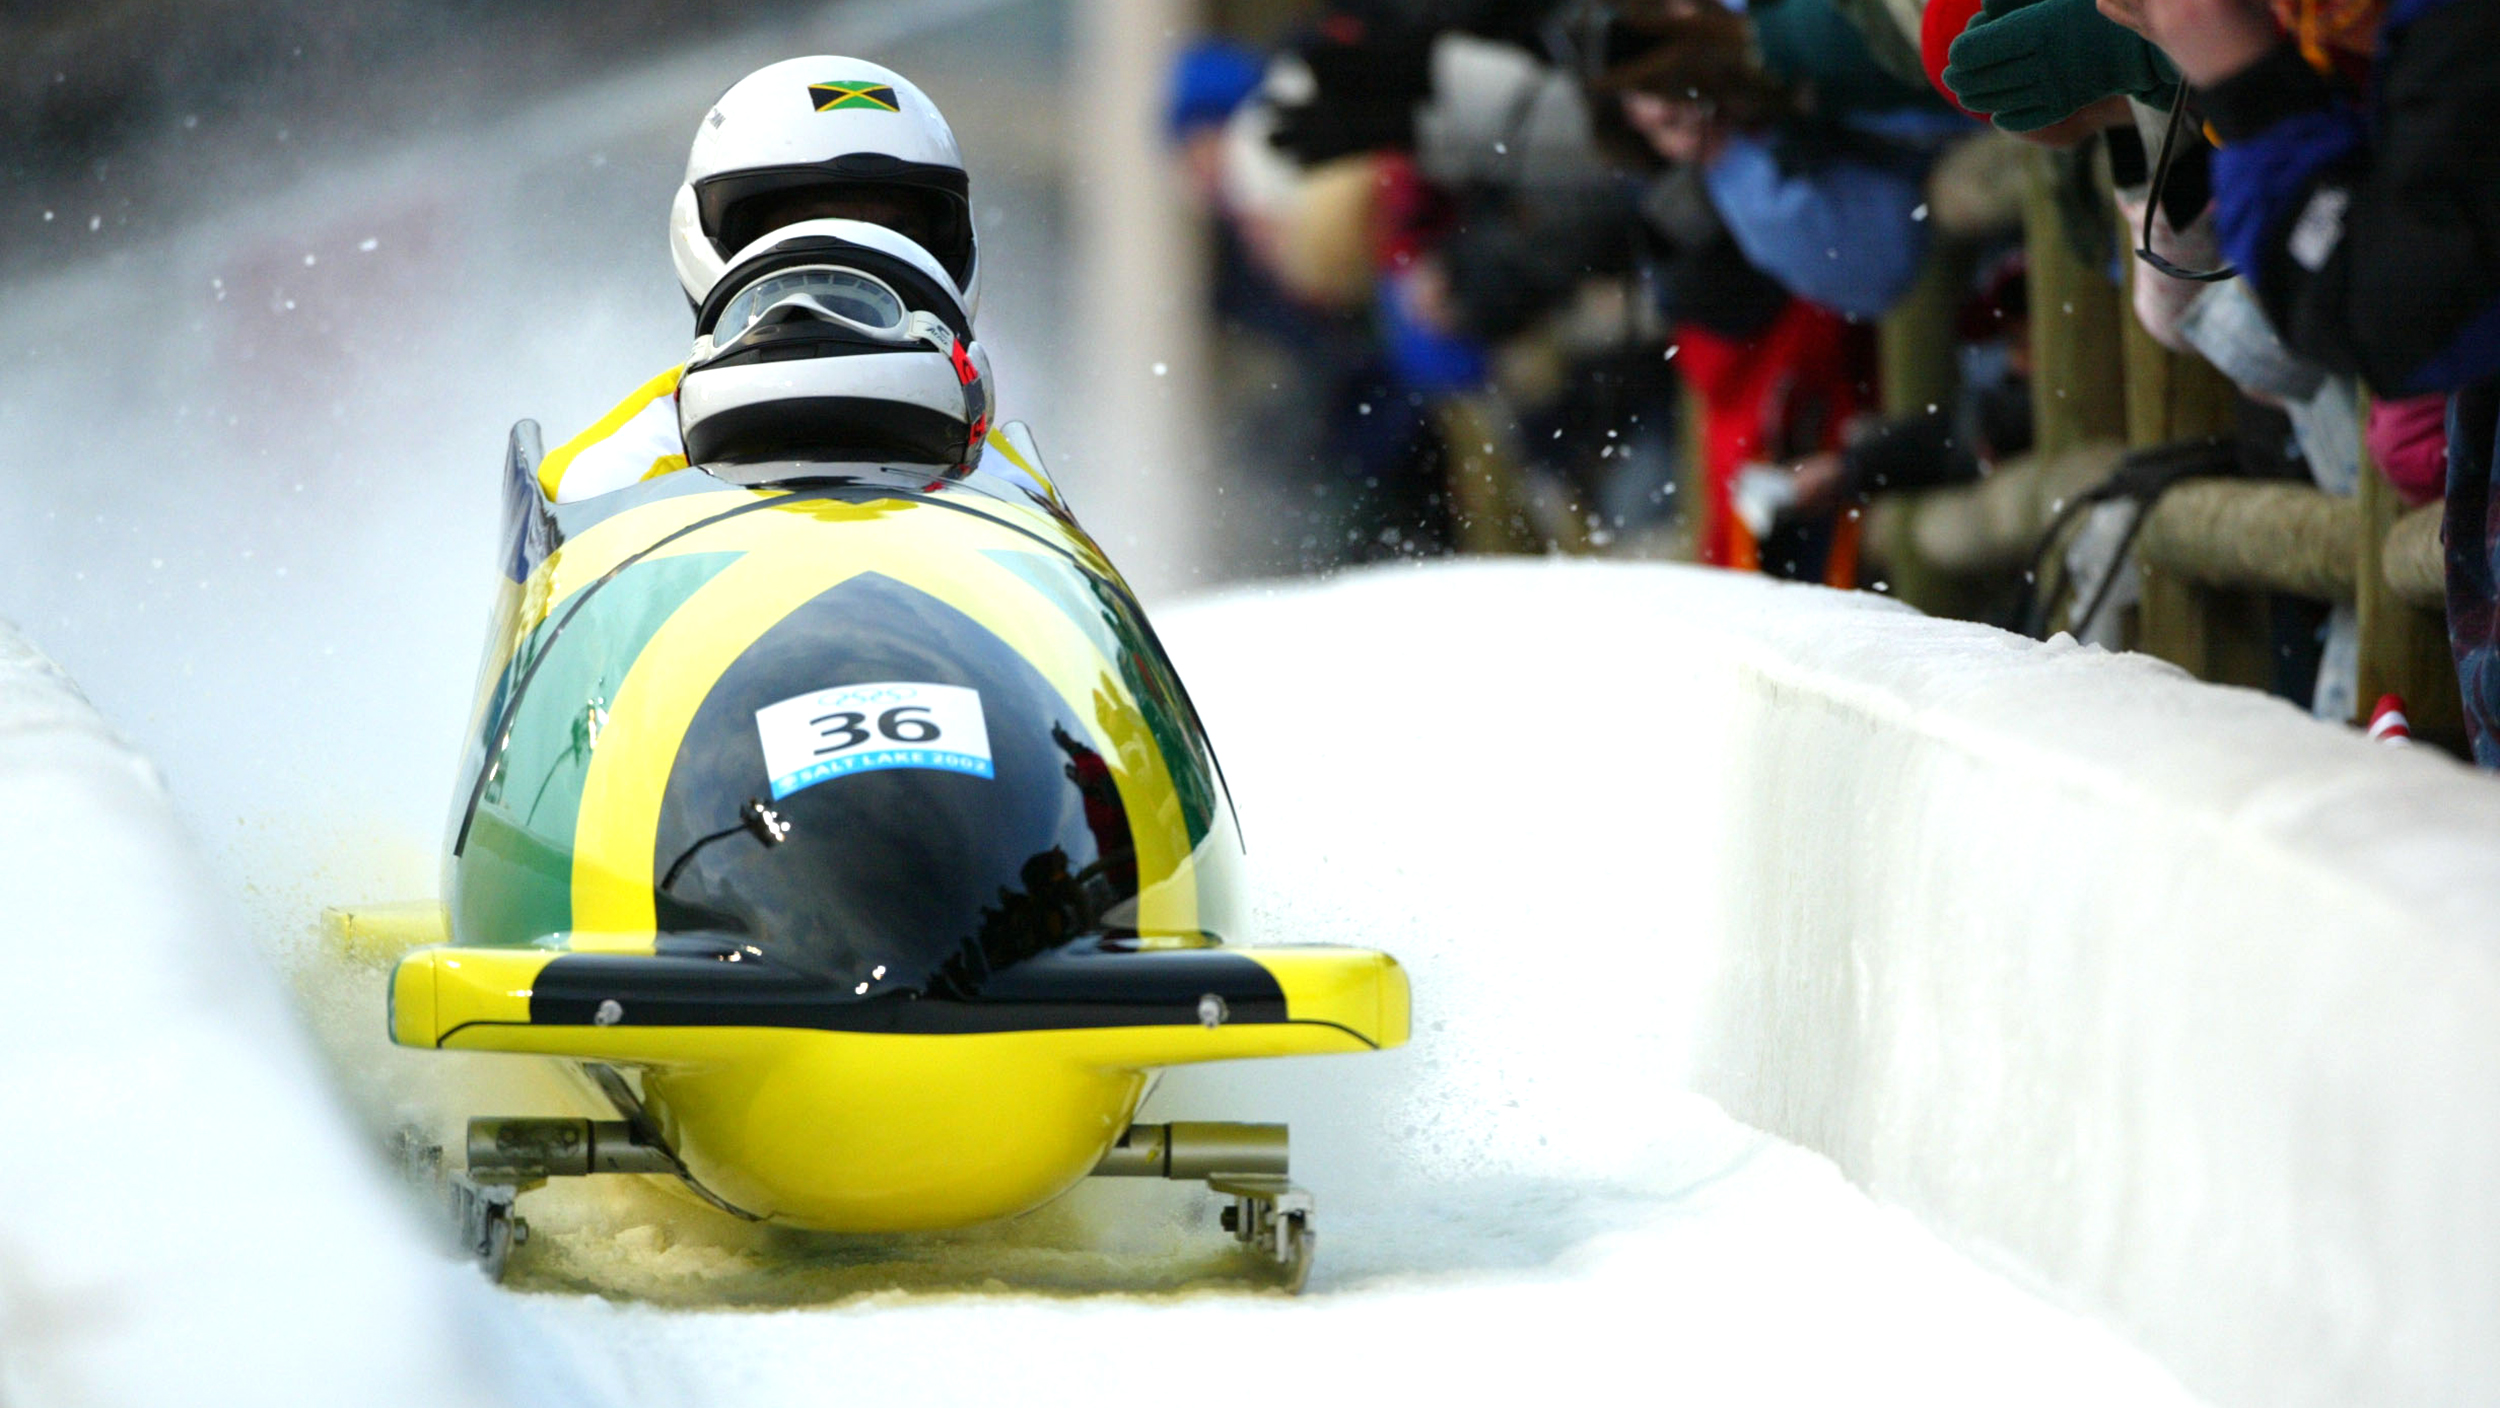 Jamaican bobsled team heads to Sochi with over $120K from fans Its a dream